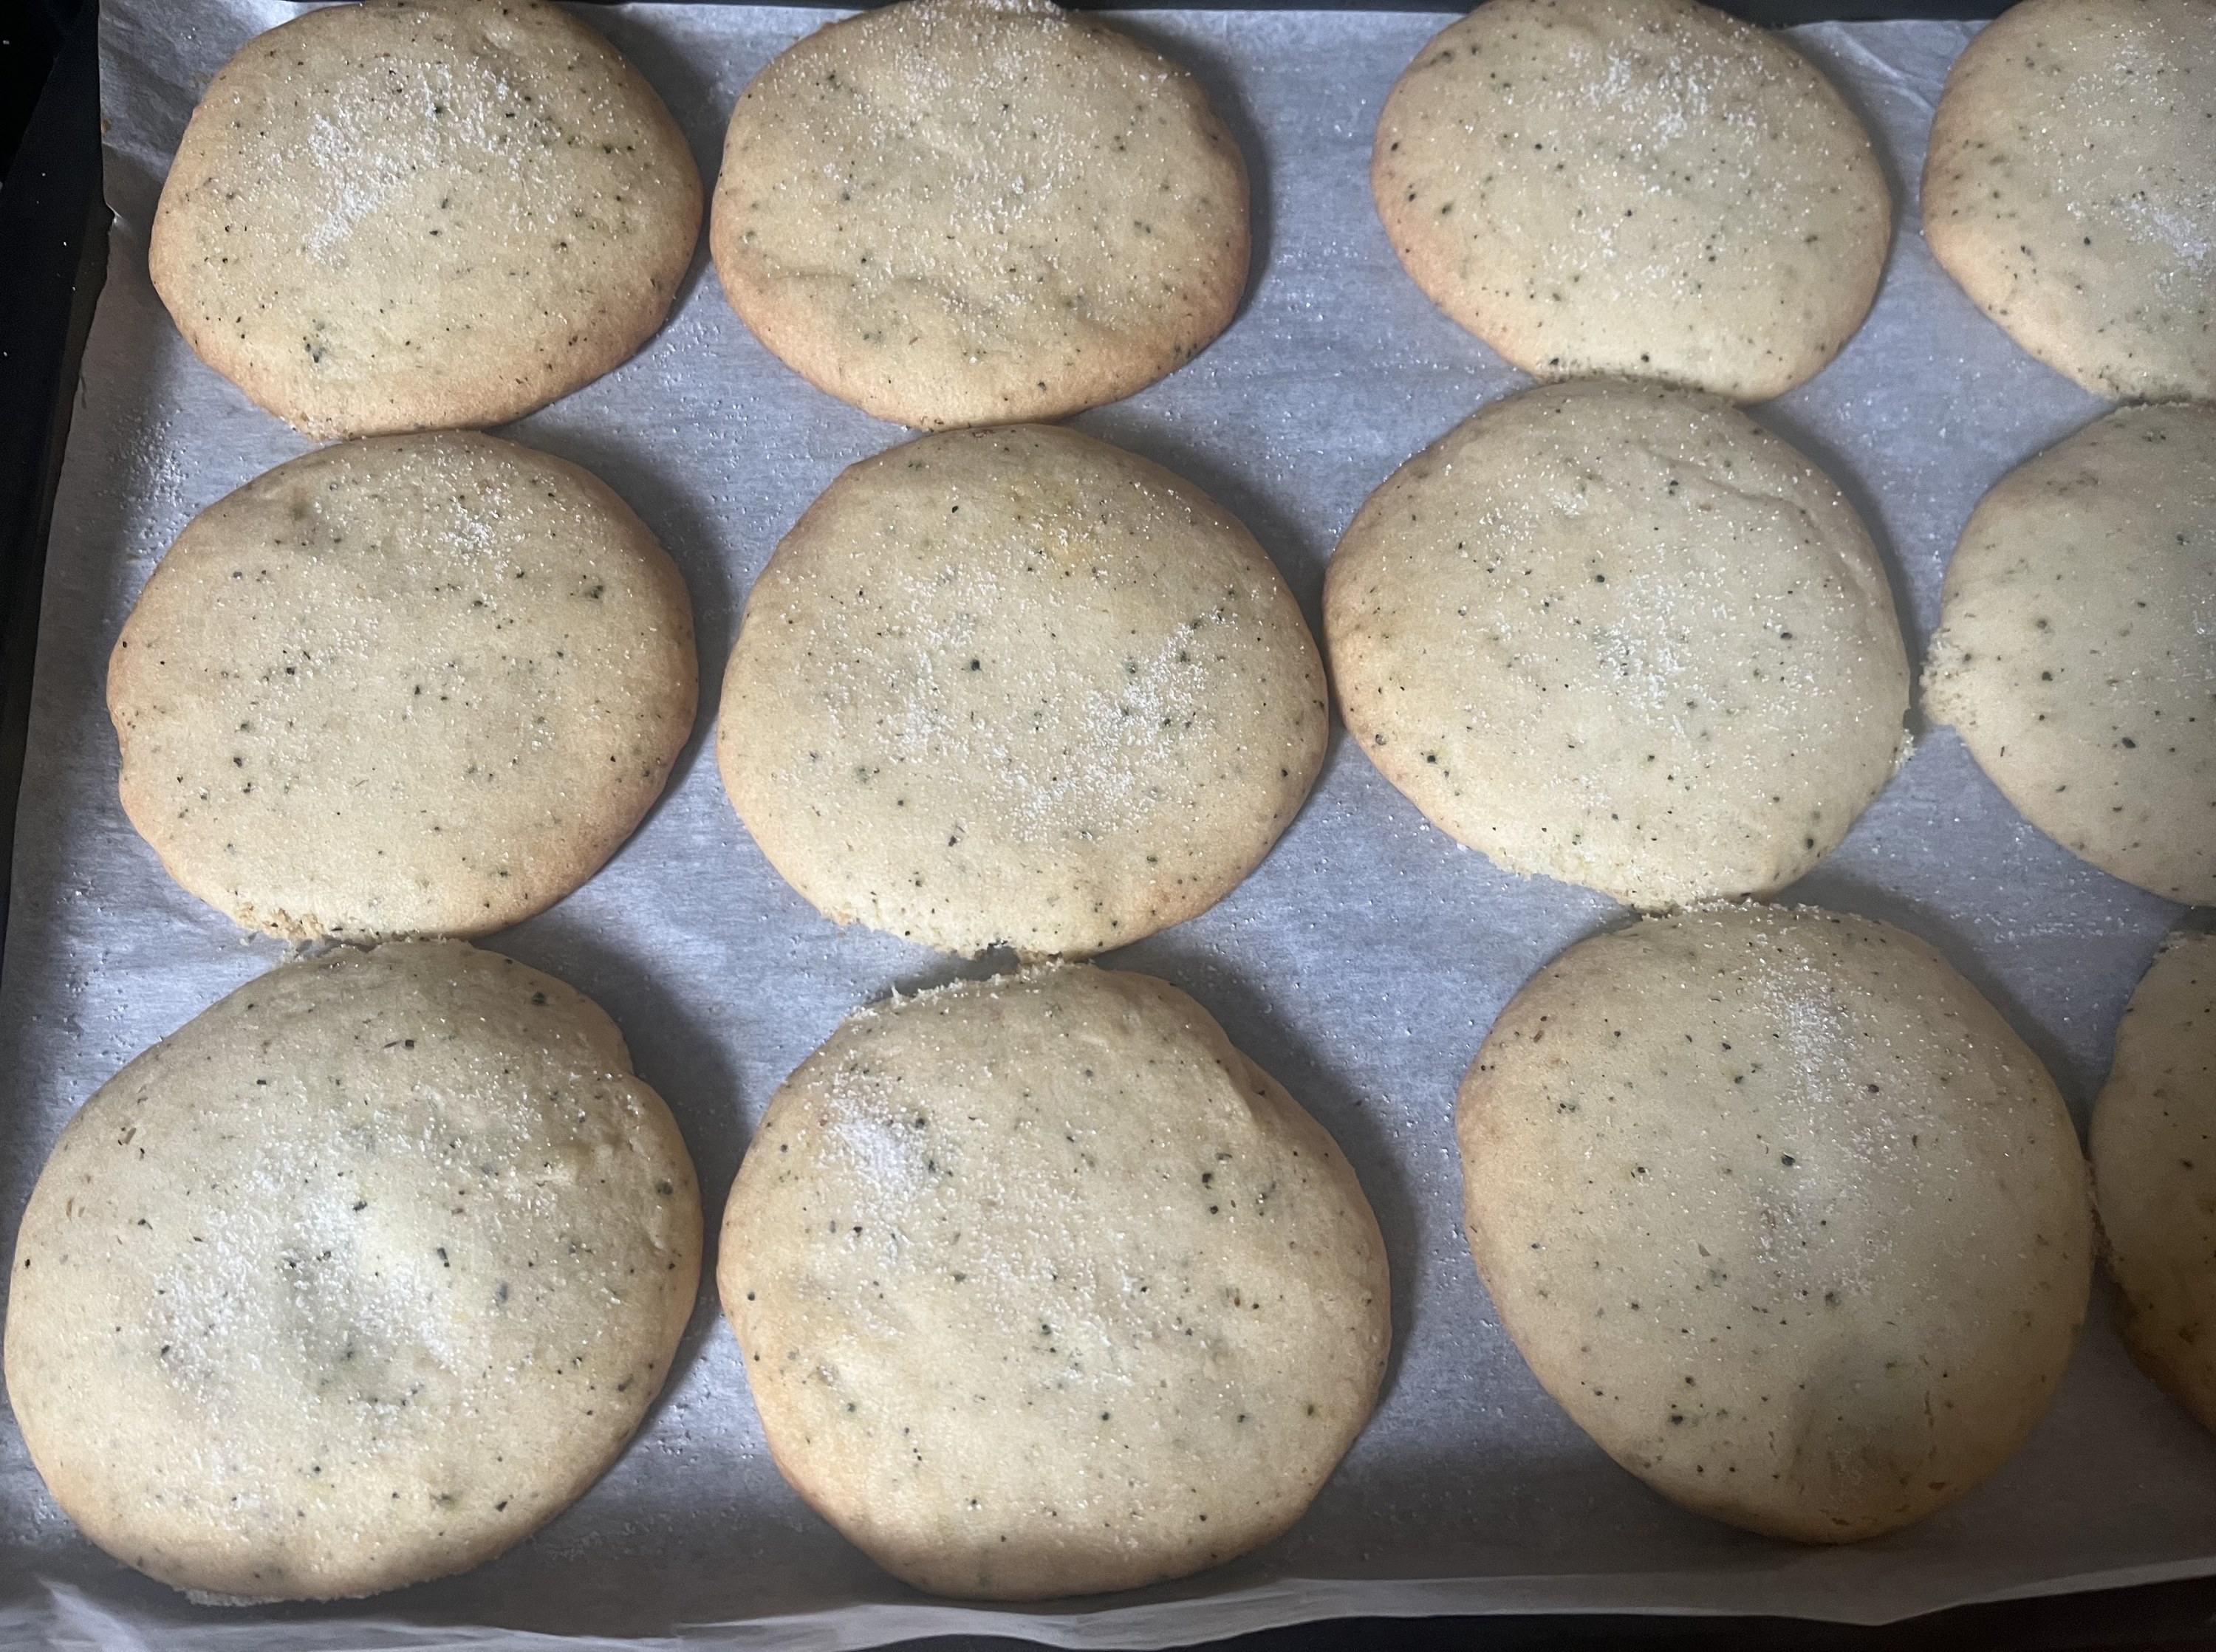 the baked cookies with granulated sugar sprinkled on top